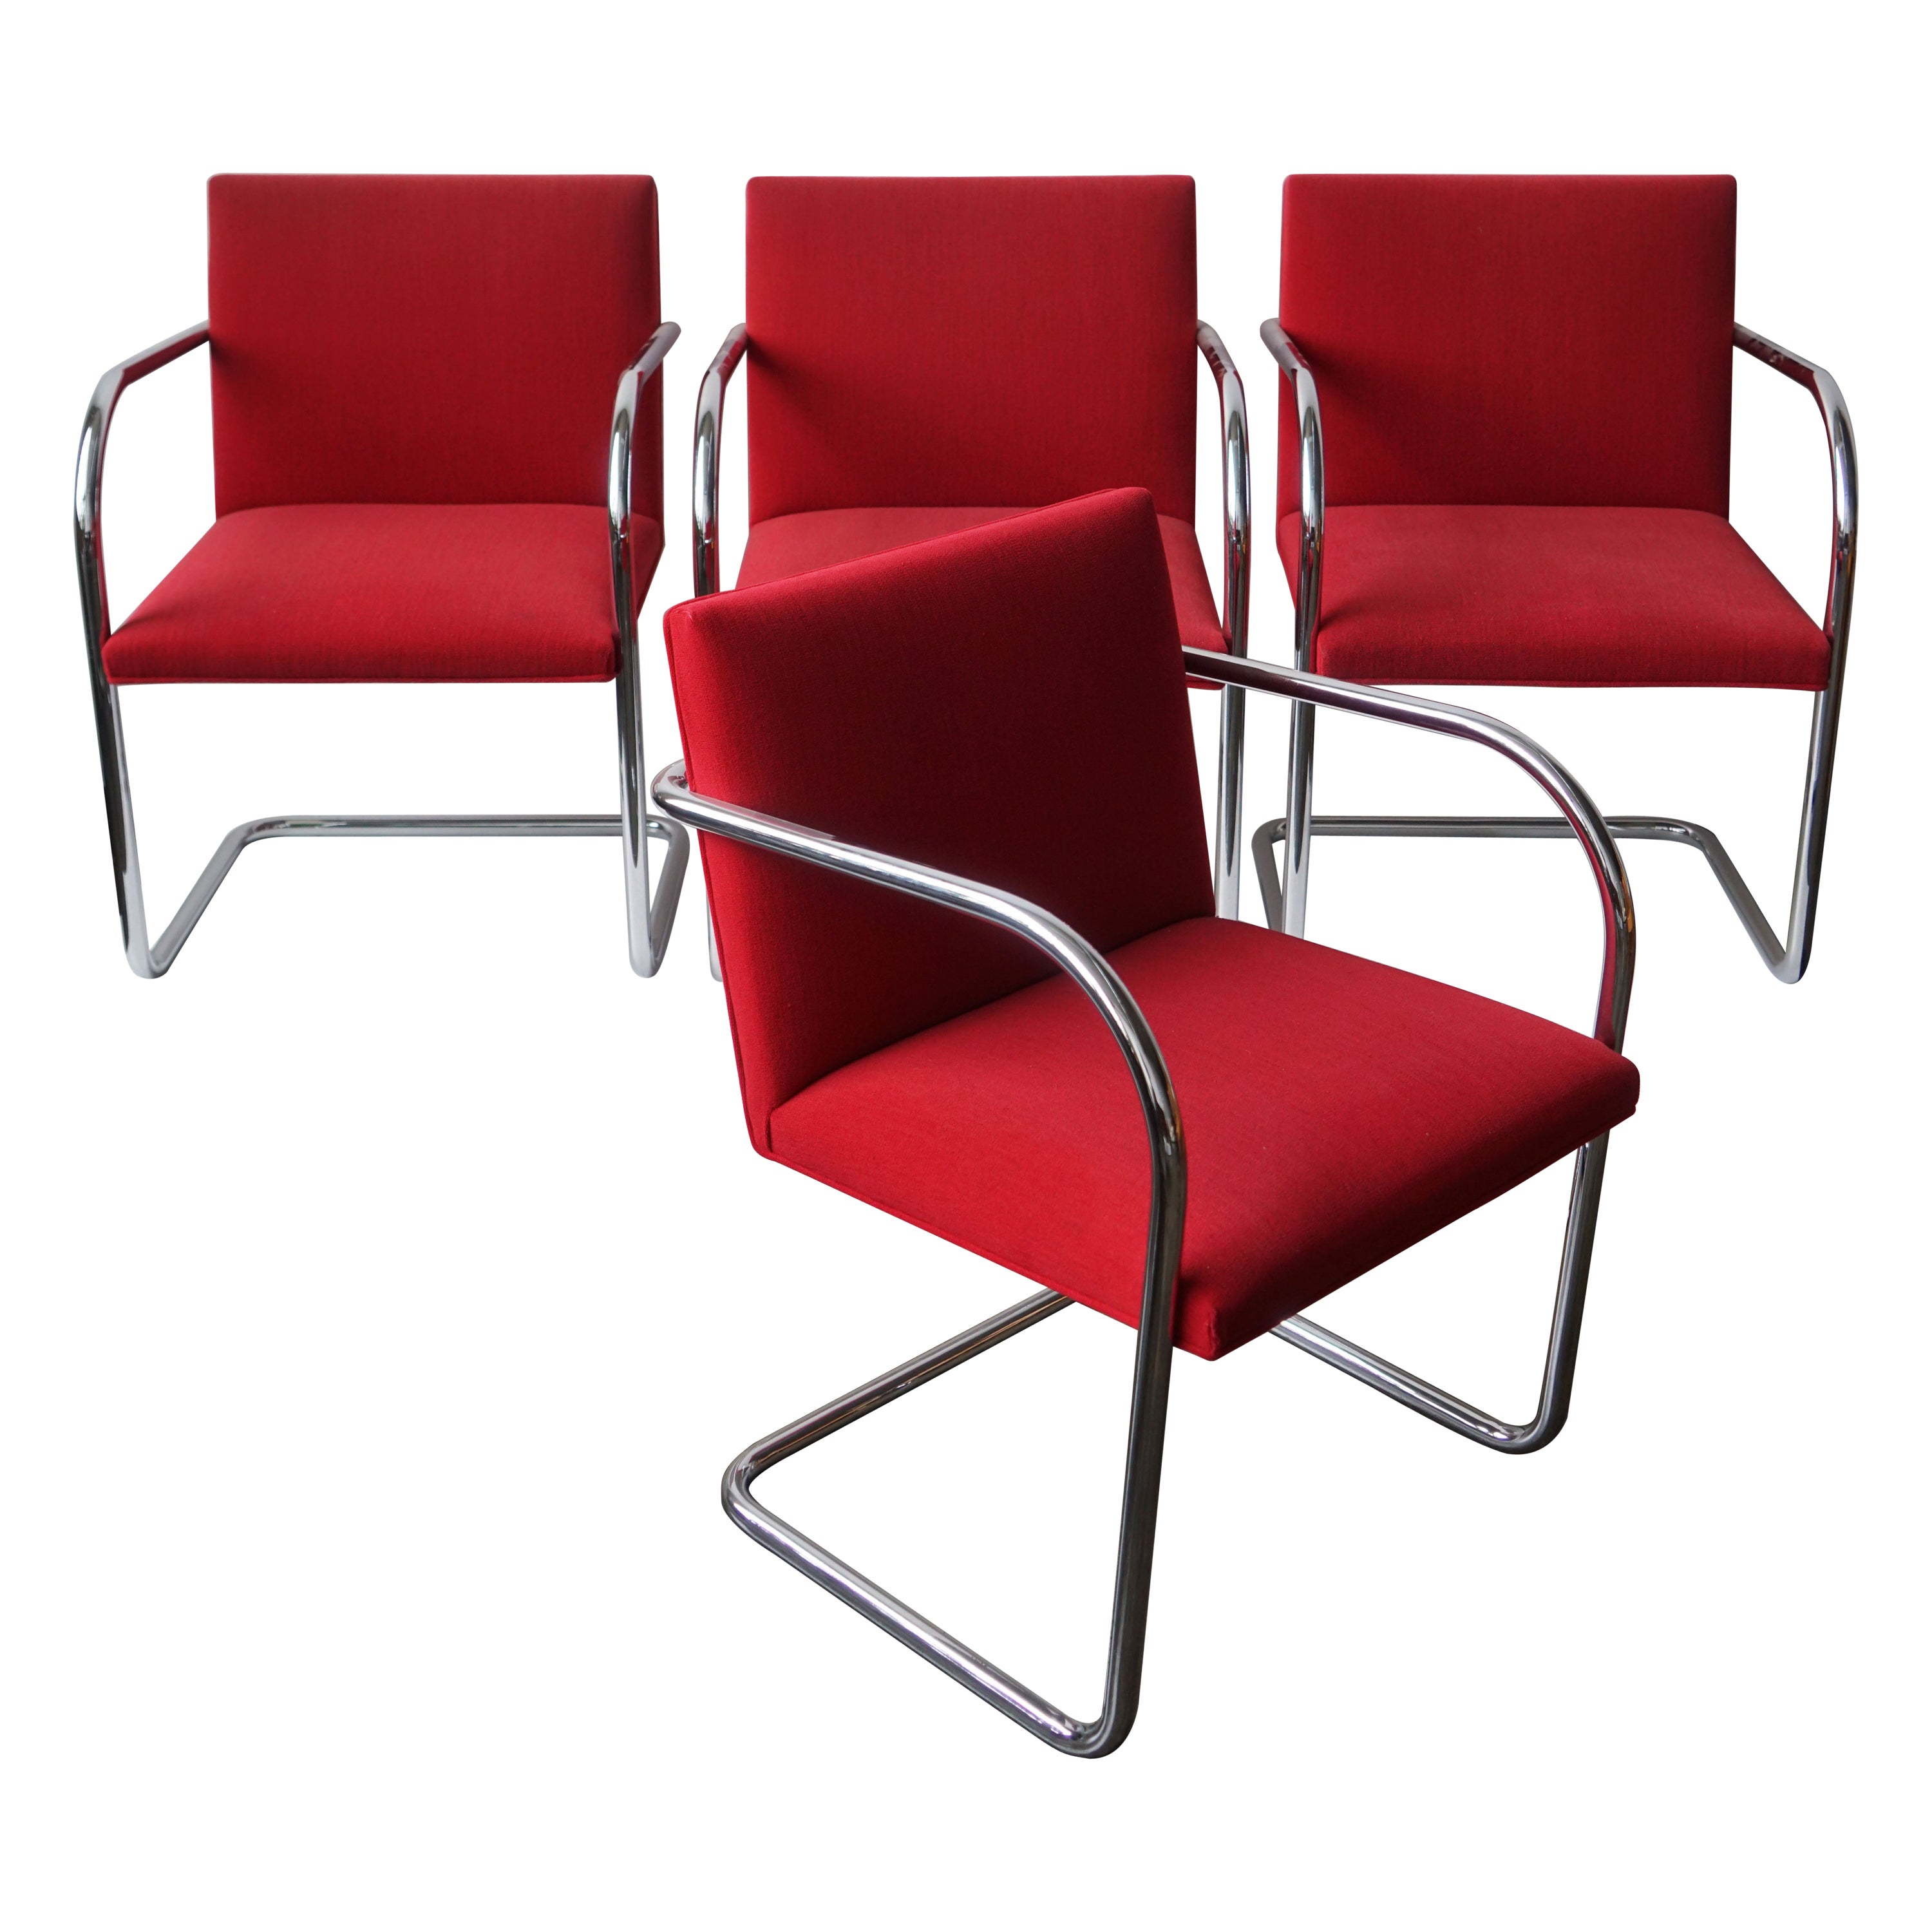 Mies Van Der Rohe Brno Chairs for Knoll in Red, Set of 4